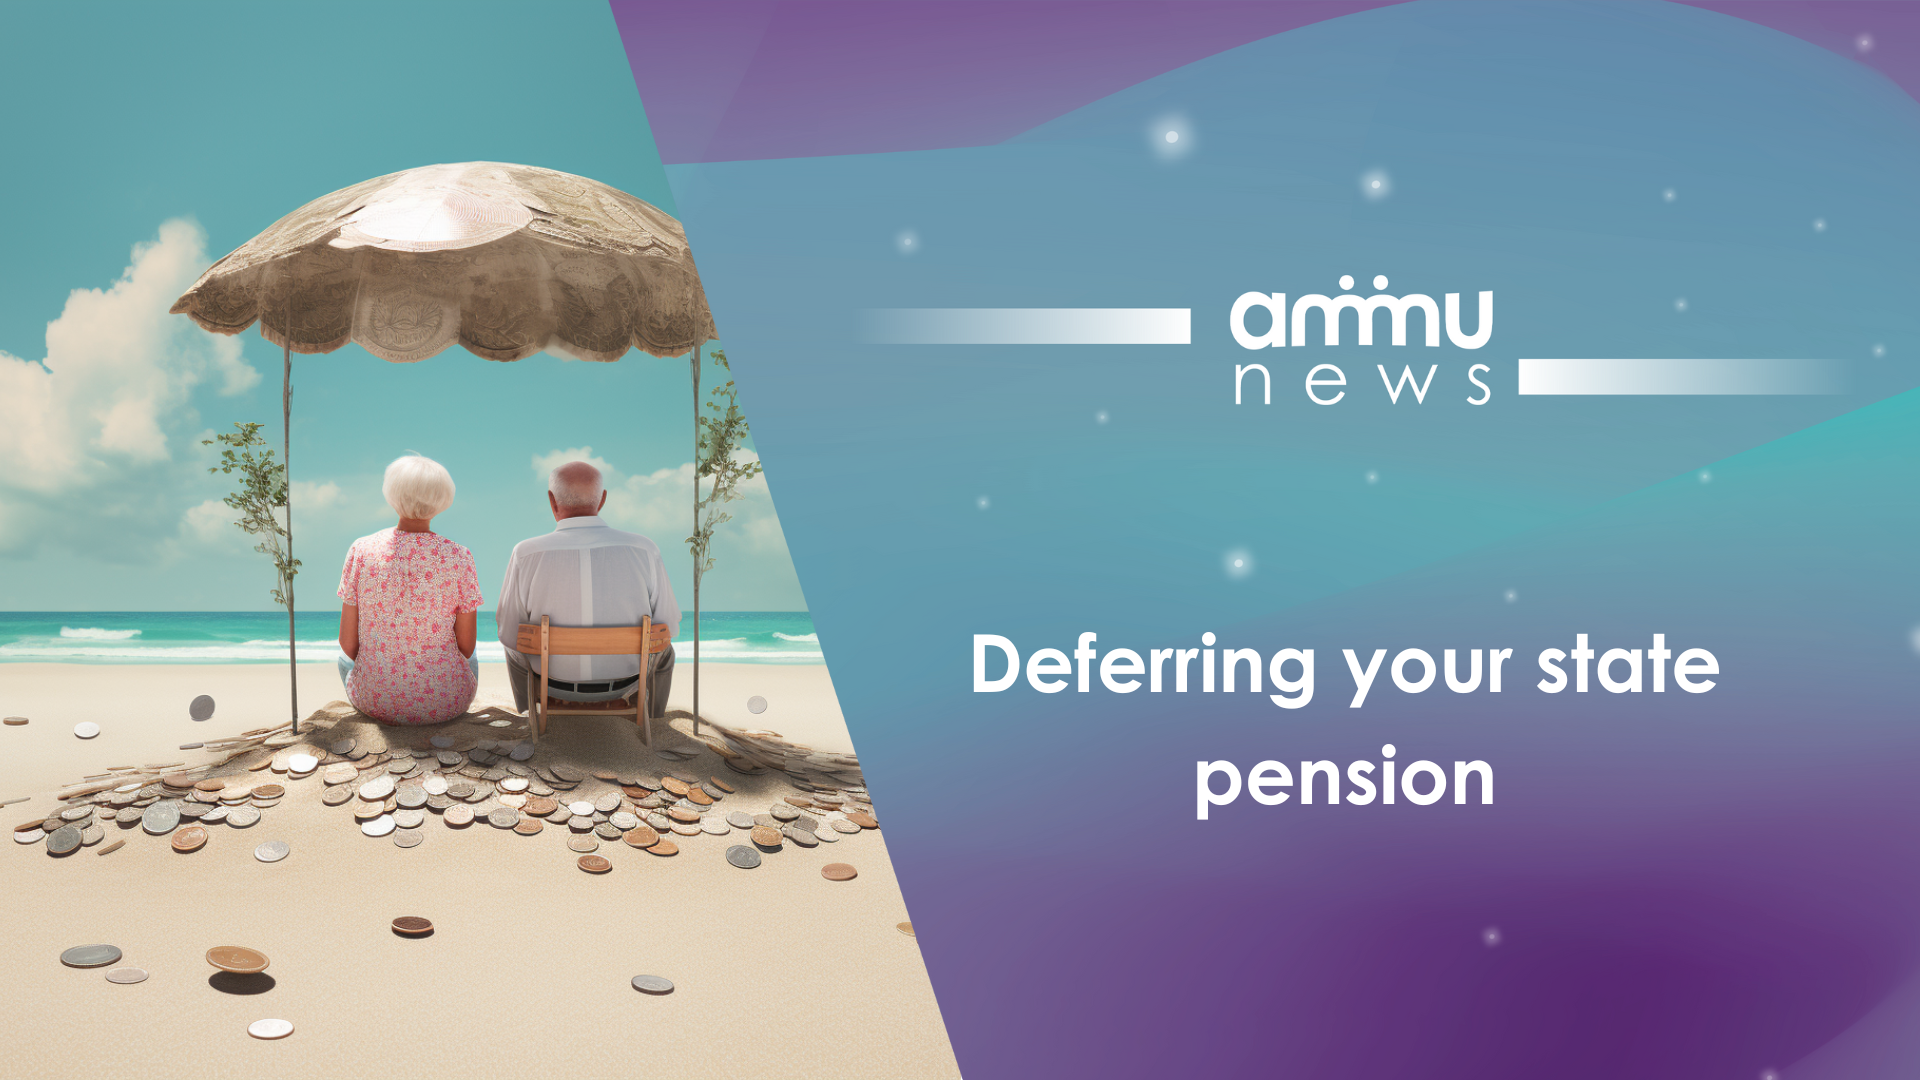 Deferring your state pension